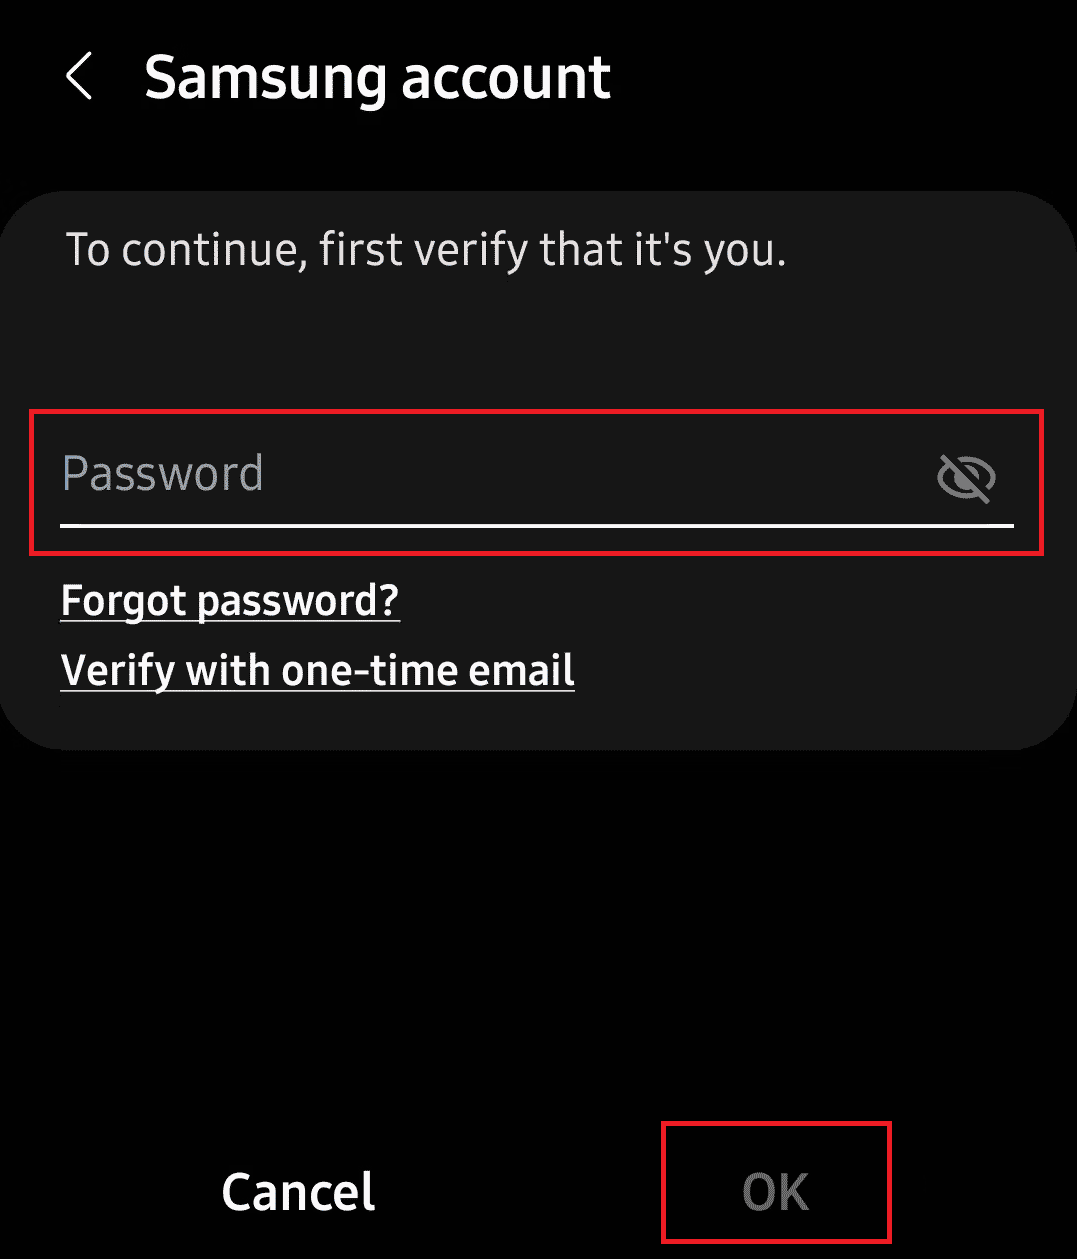 Enter your Samsung account Password and tap on OK